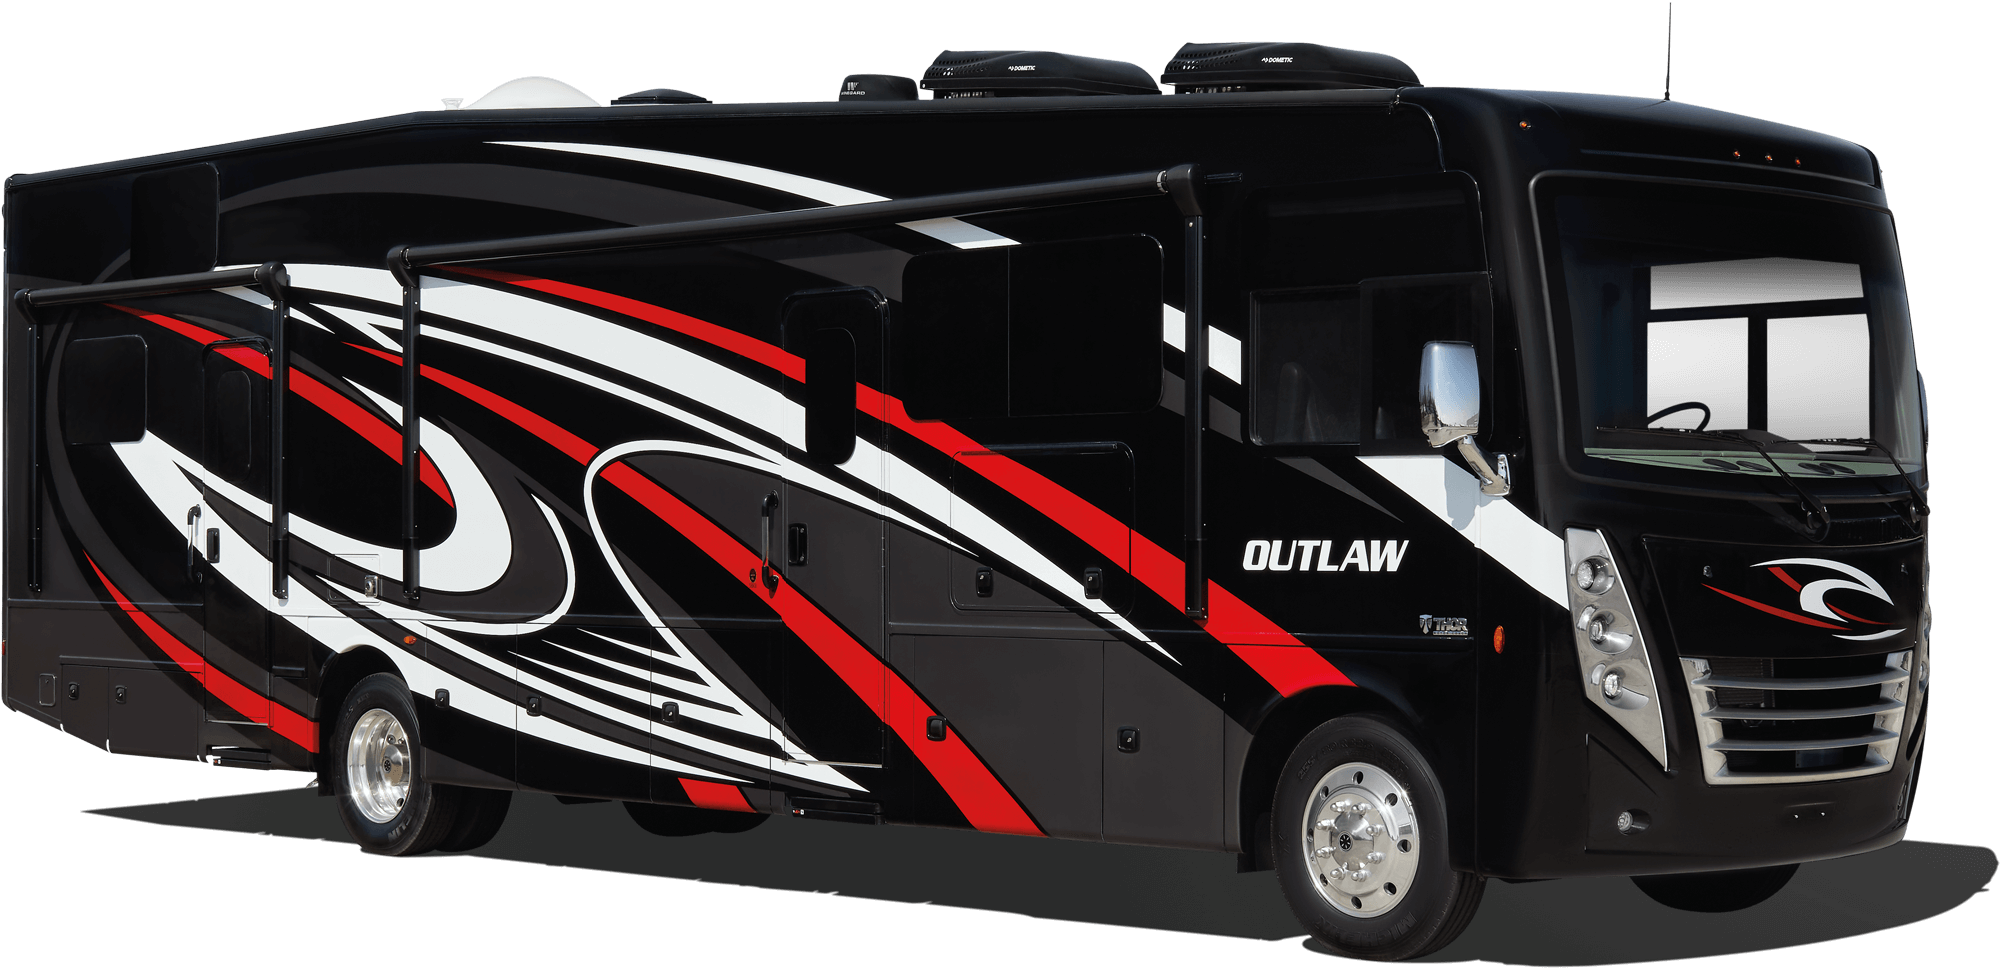 Outlaw Class A Toy Hauler Motorhomes Thor Motor Coach